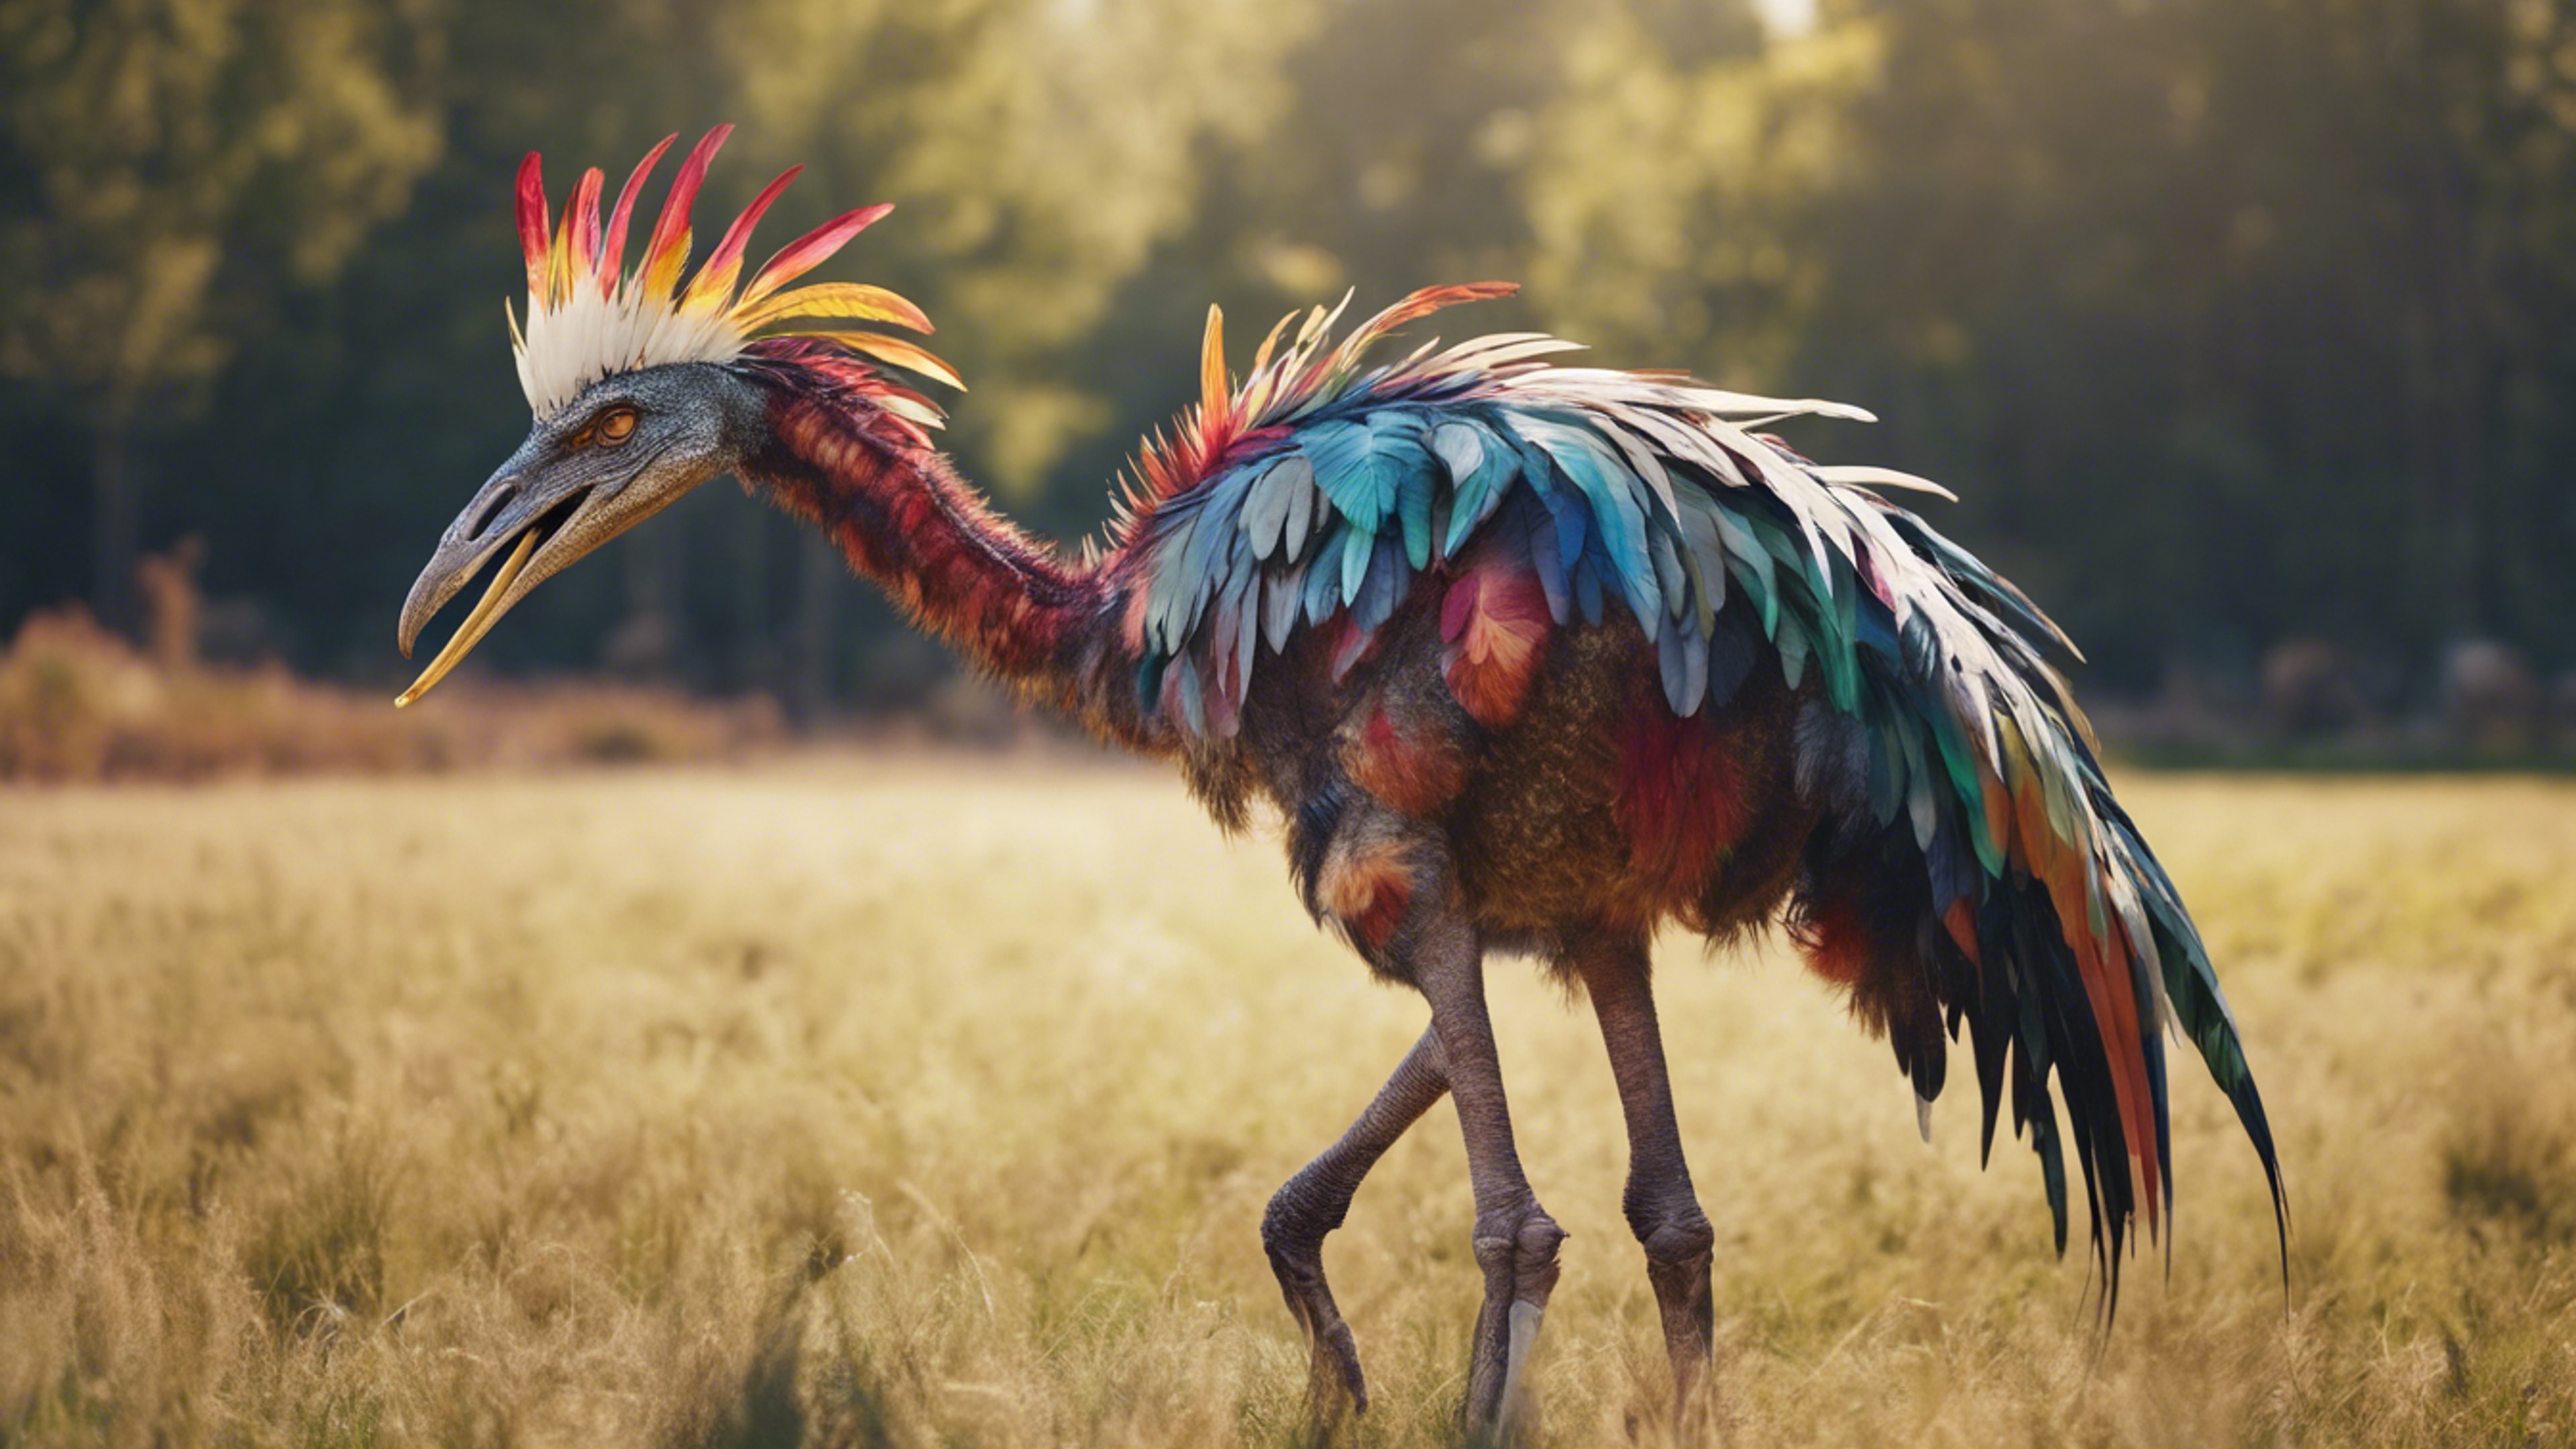 A Struthiomimus with colorful feathers prancing around in an open meadow. Ფონი[bbeb240df8e5485aba58]